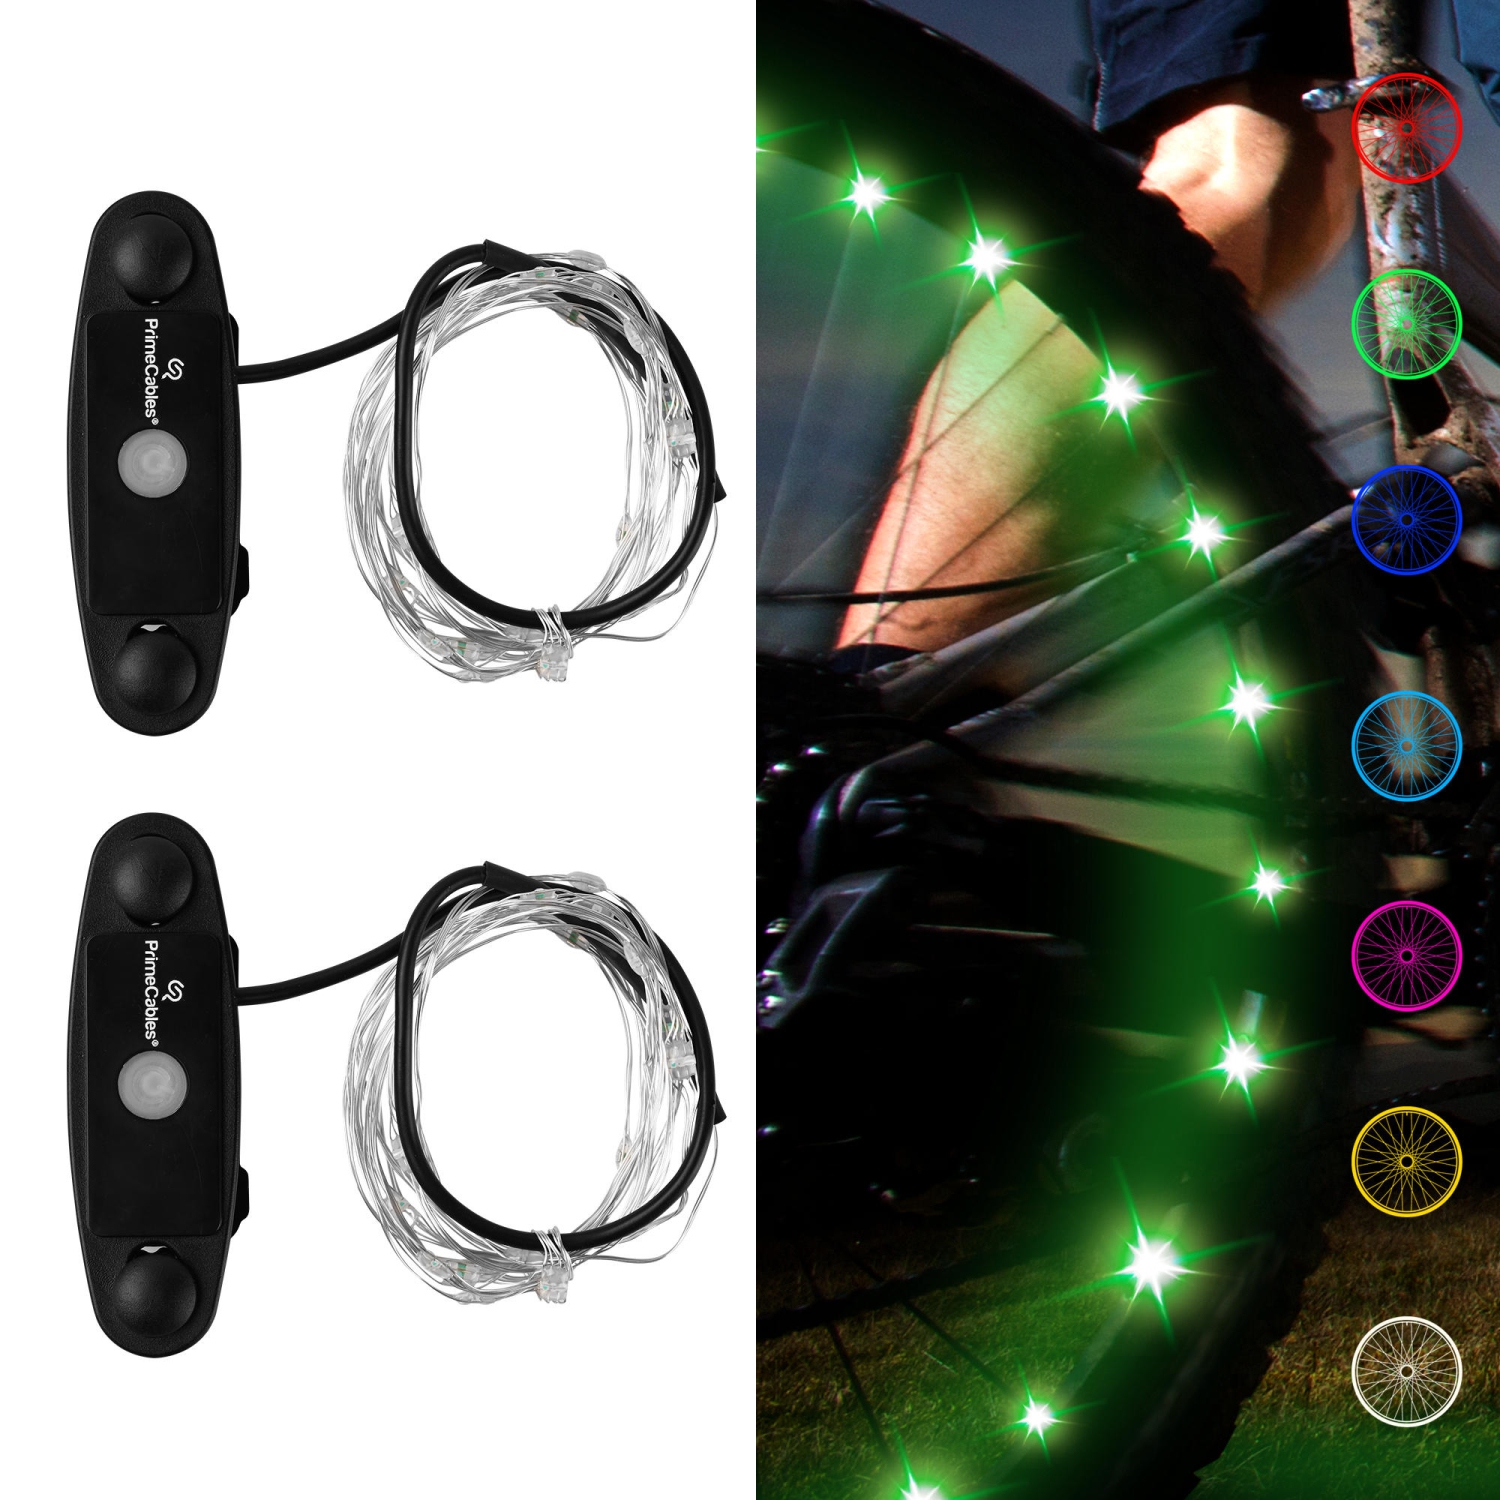 16" and up LED Bike Wheel Lights, 2-Tire Pack RGB Bicycle Spoke Lights, IPX4 Waterproof - PrimeCables®